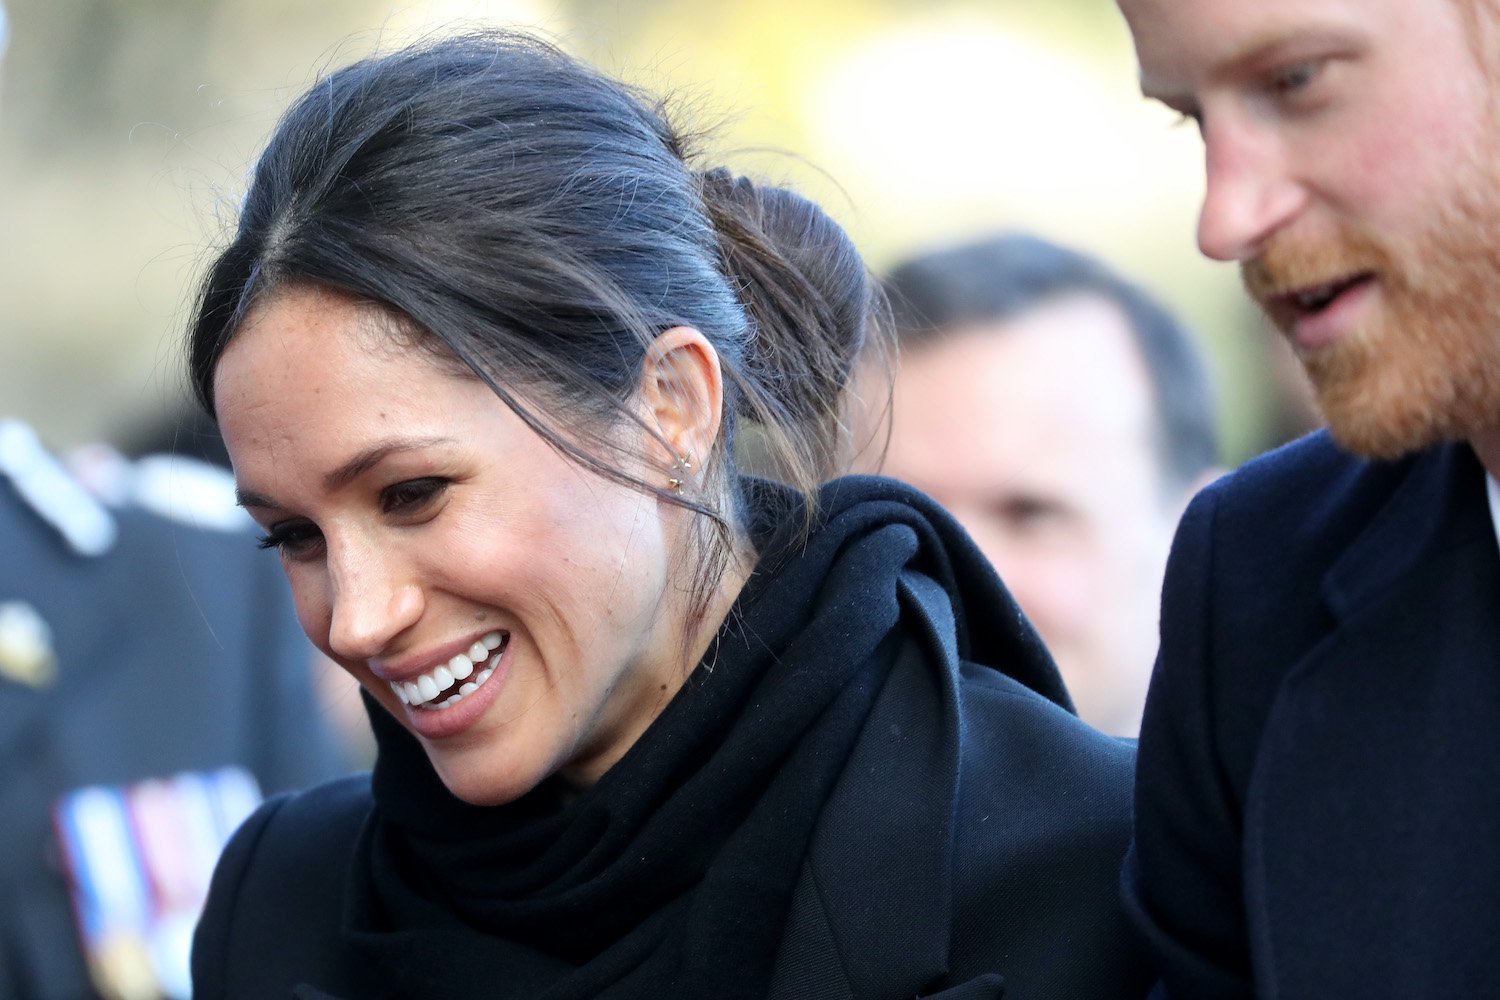 Meghan Markle wanted a red carpet moment during an 2018 visit to Wales but Prince Harry steered her along